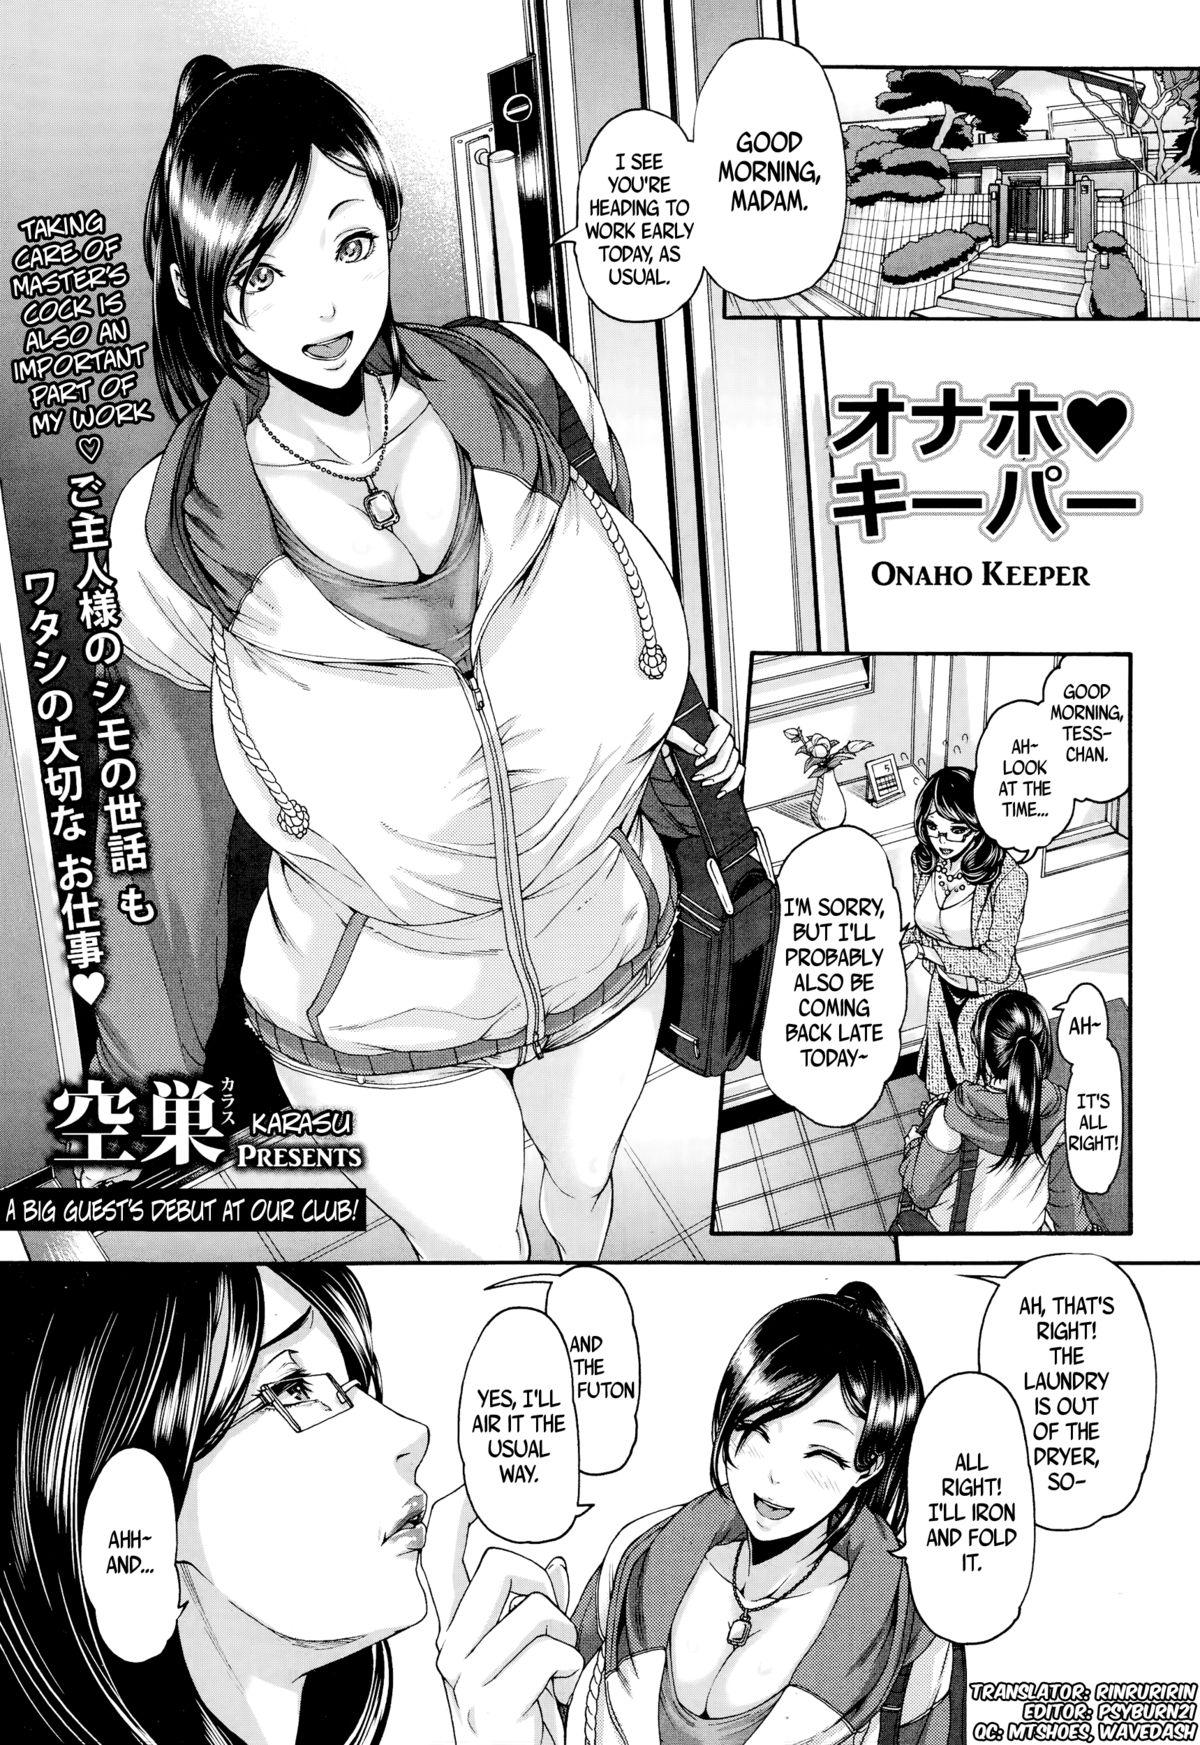 Butt Onaho Keeper Deep Throat - Page 1